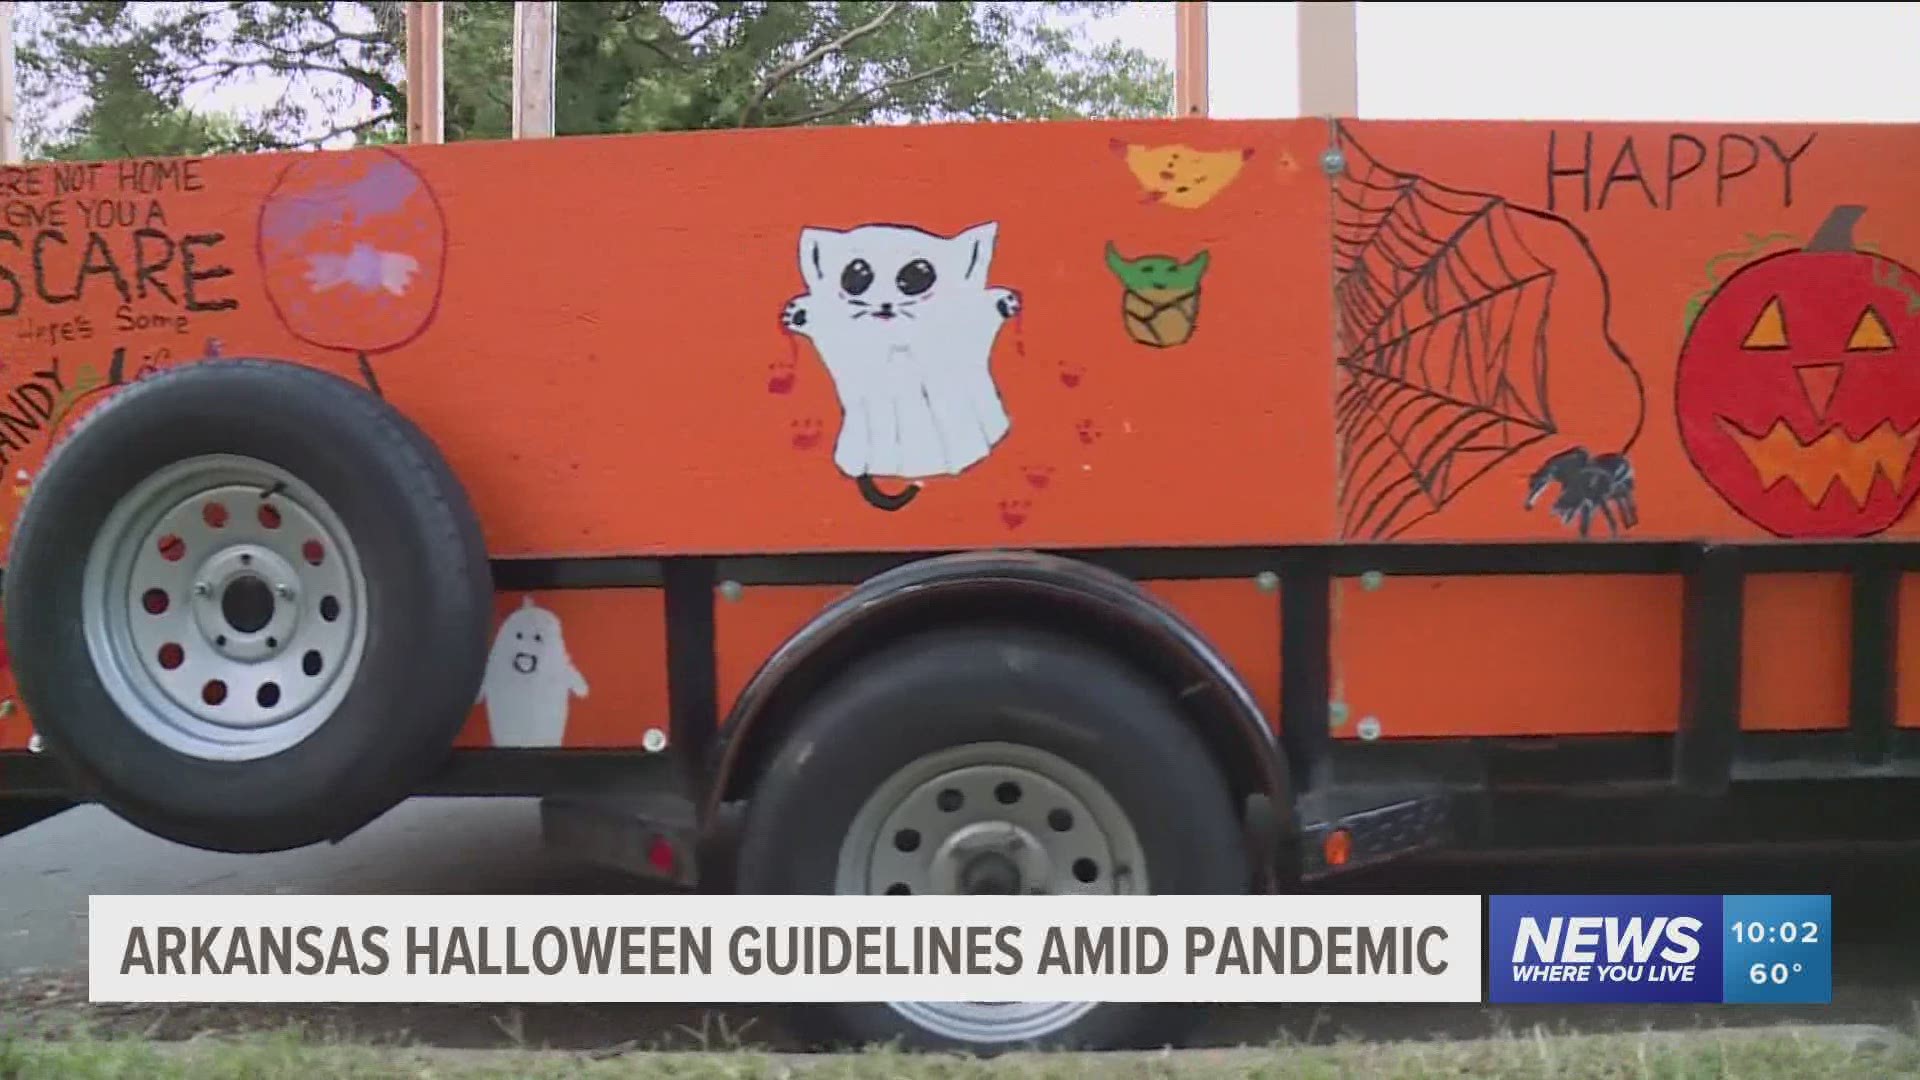 Safety guidelines have been set for those who plan on celebrating Halloween during the COVID-19 pandemic.